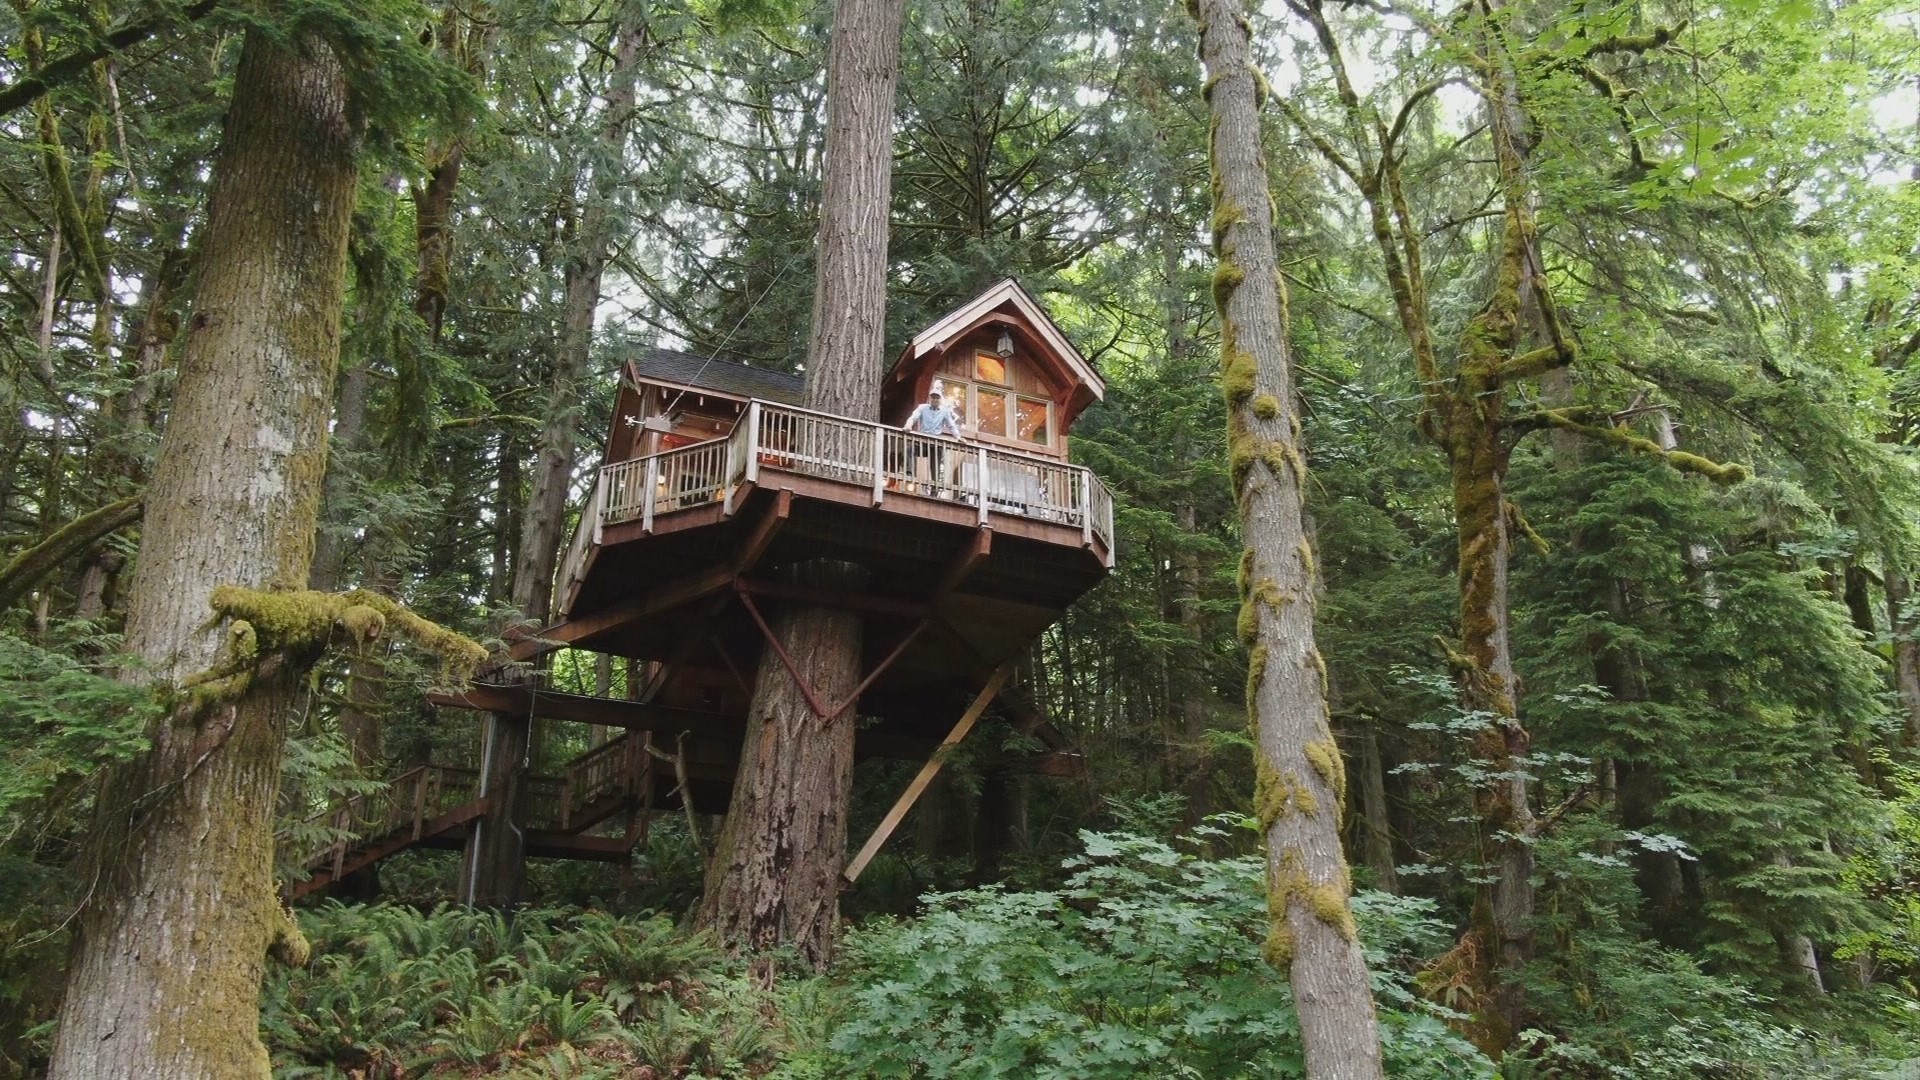 Built by a renowned treehouse master, it could be in your backyard